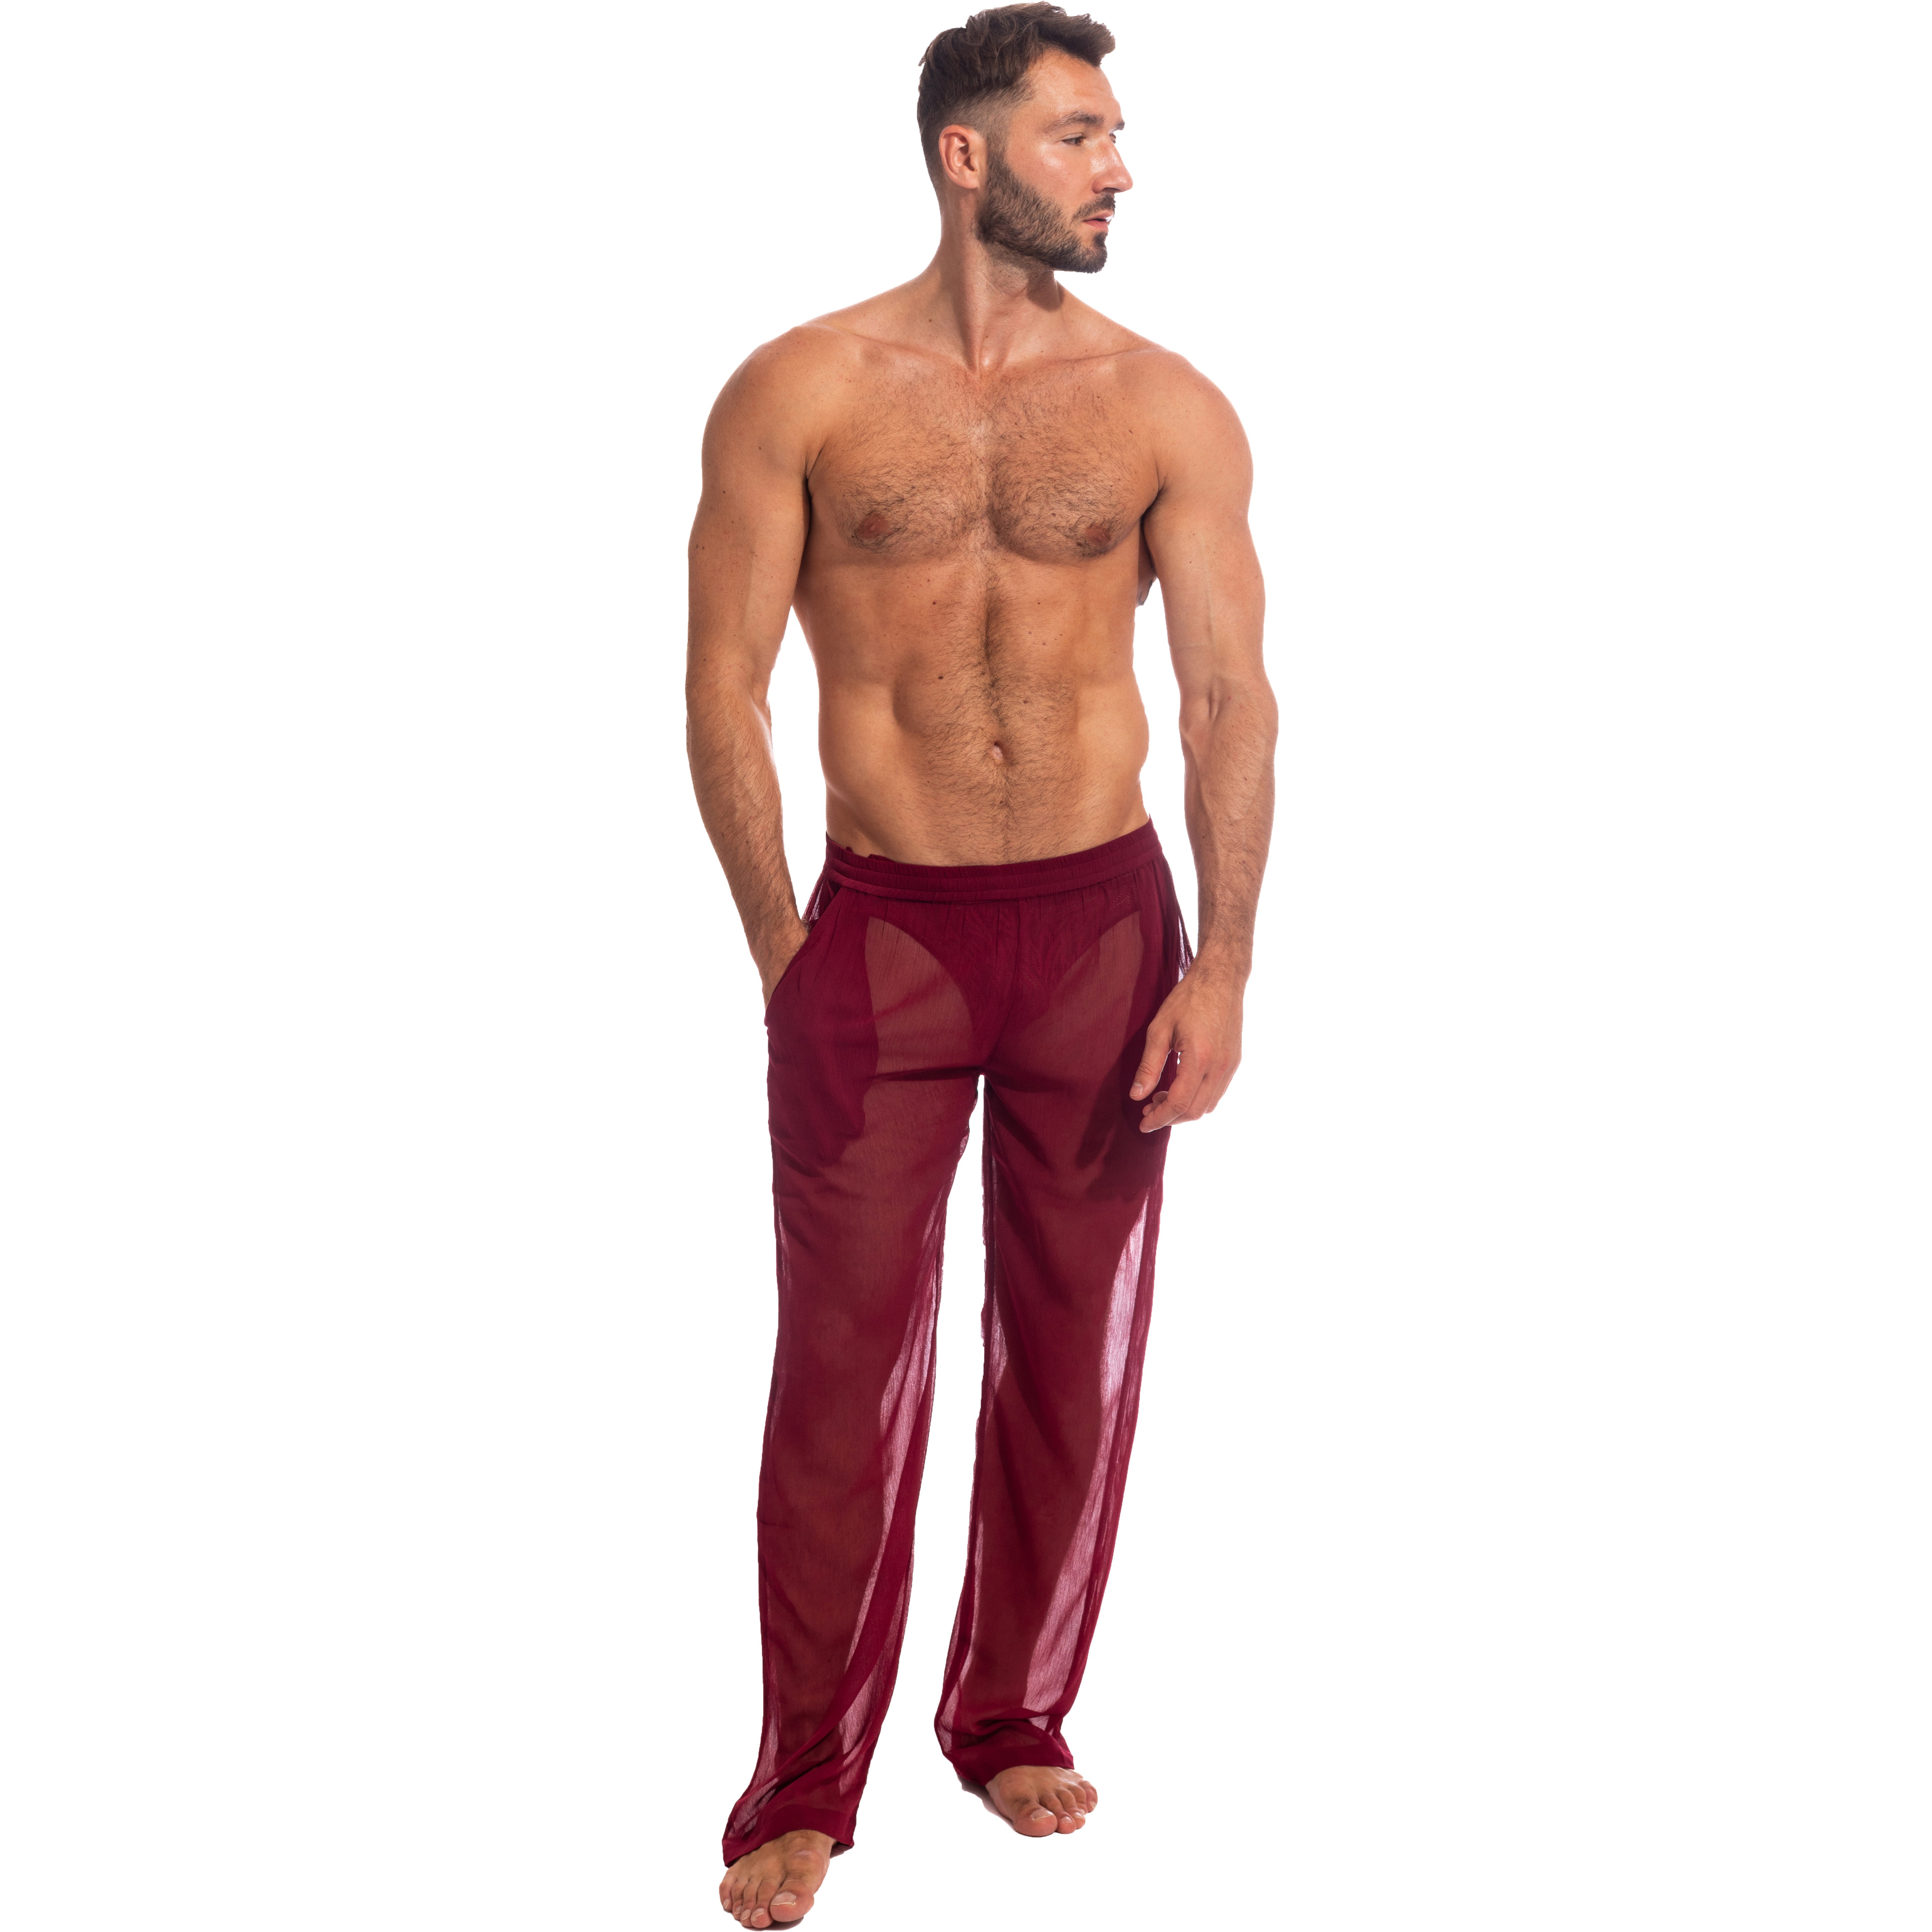 https://www.luniversdelhomme.com/89232/chantilly-red-transparent-trousers.jpg